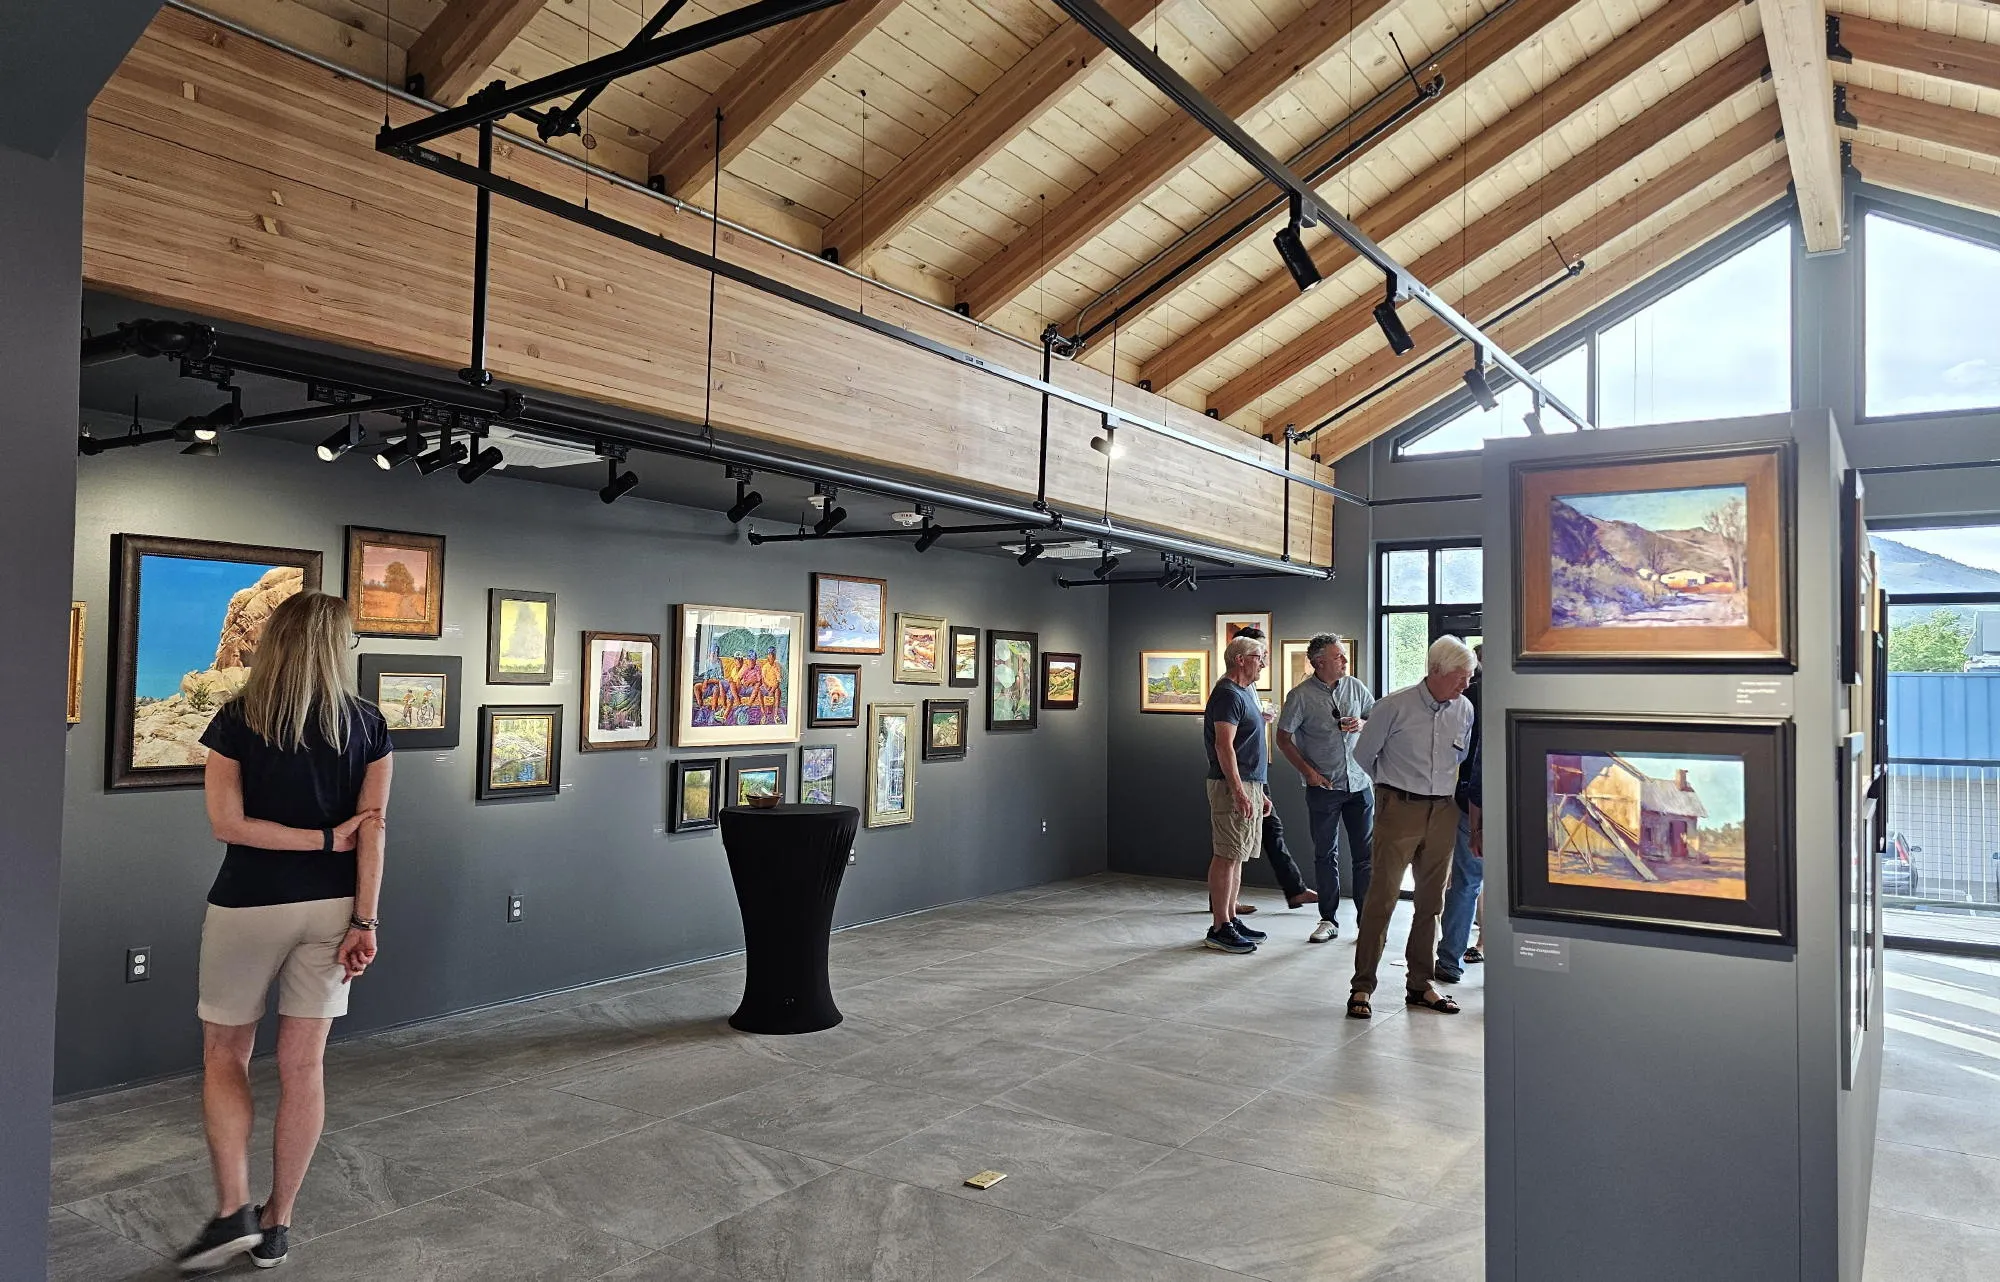 gallery room with vaulted timber ceiling, painting on the all, people, and large windows looking out at the foothills